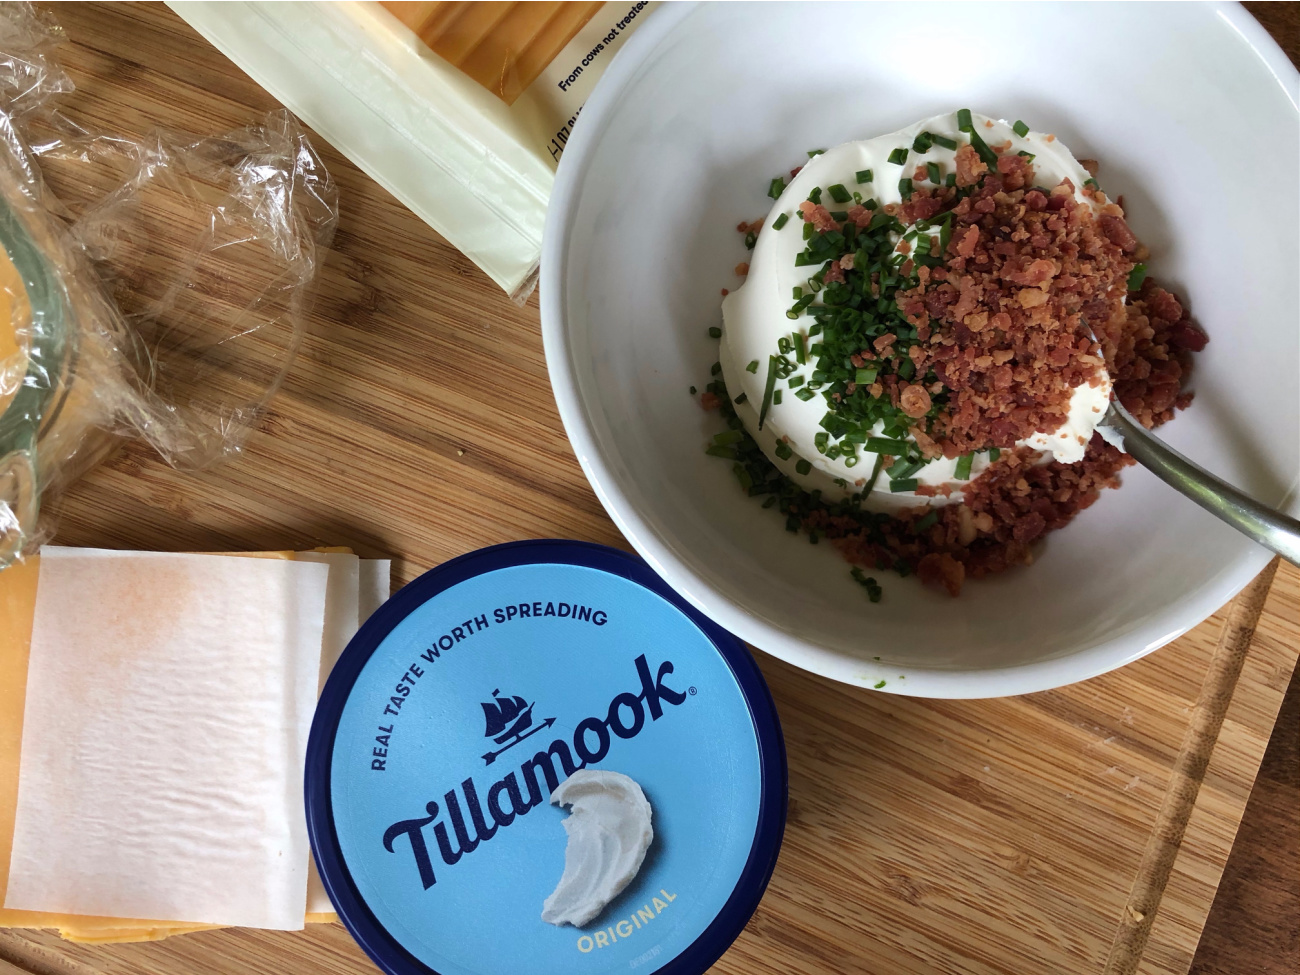 Summer Entertaining Made Easy With Tillamook - Save Now At Publix on I Heart Publix 1